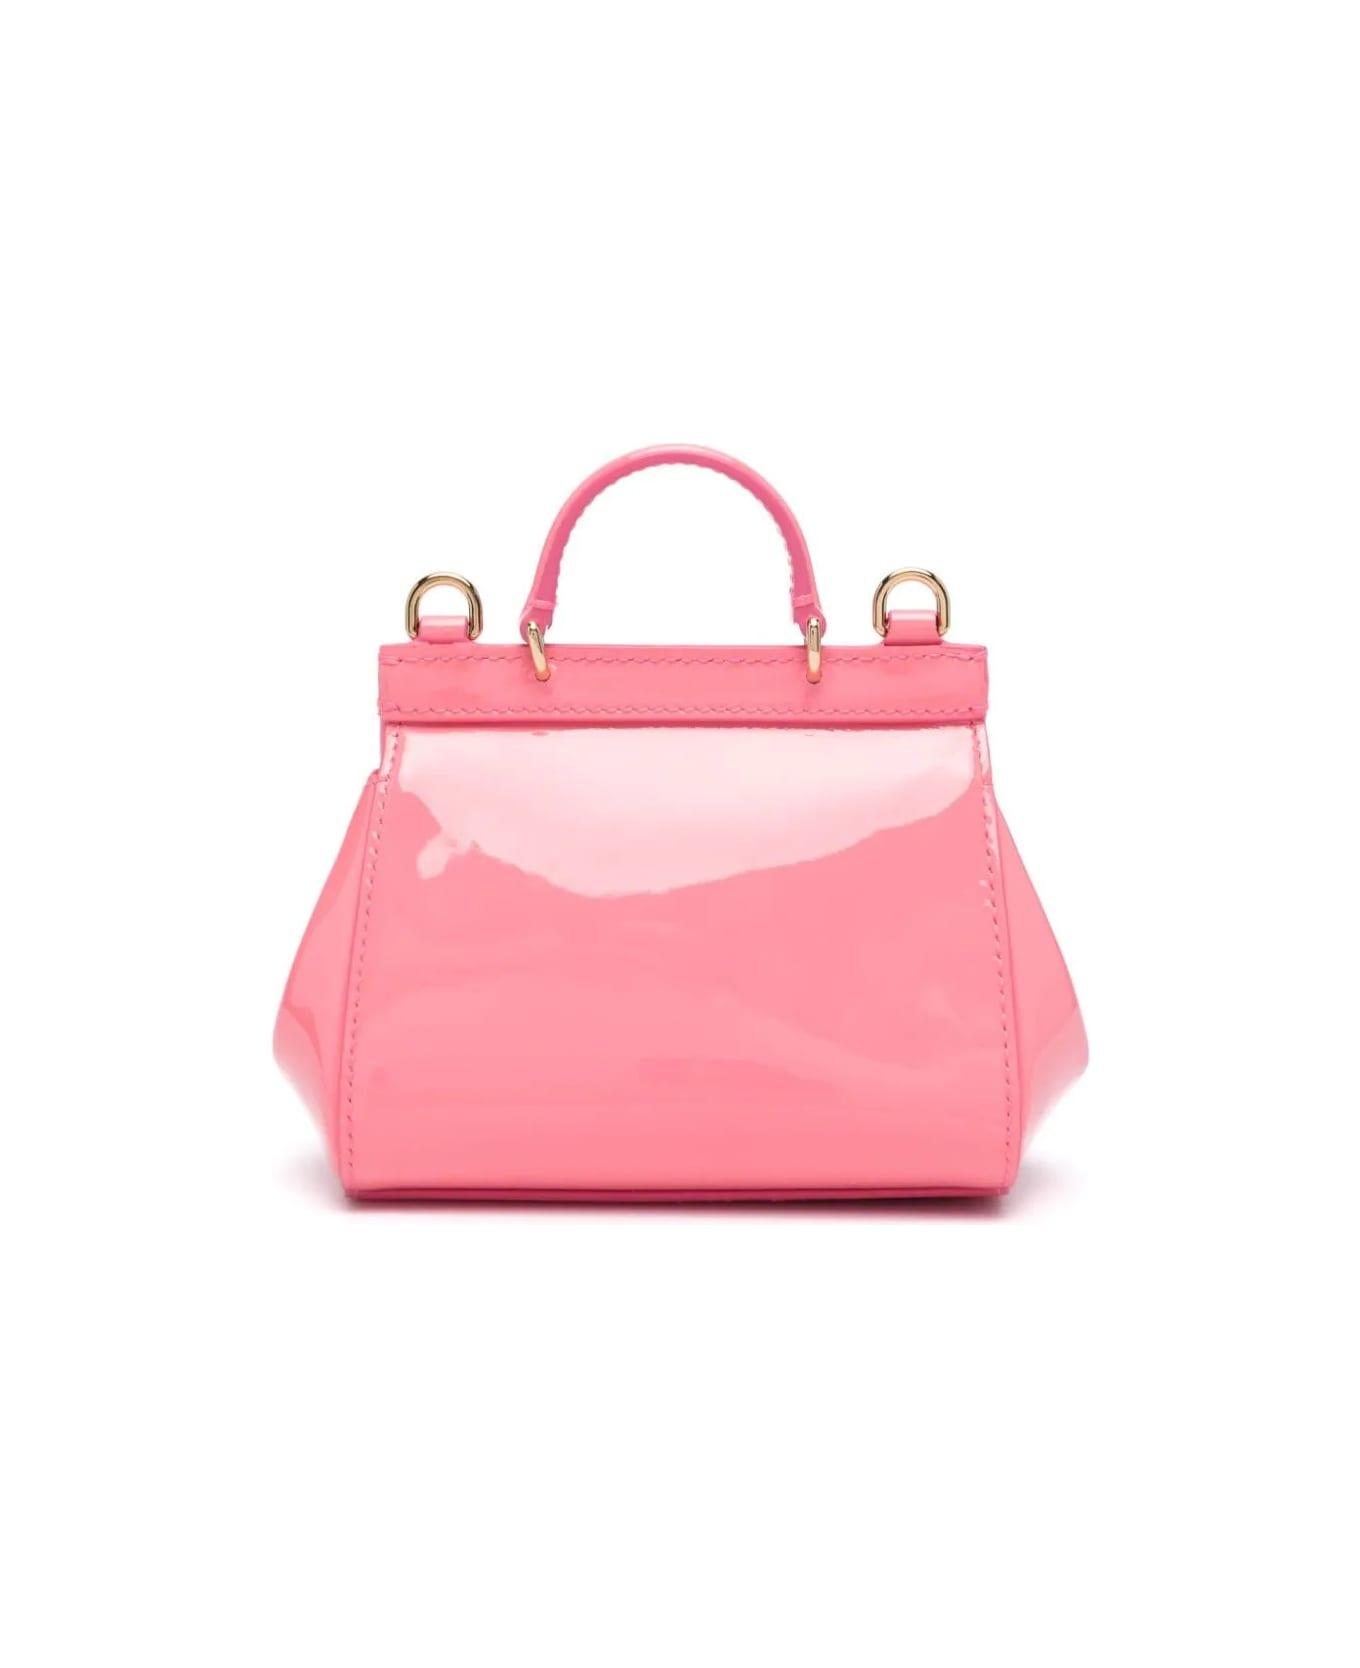 Dolce & Gabbana Mini Sicily Bag In Pink Patent Leather - Pink アクセサリー＆ギフト